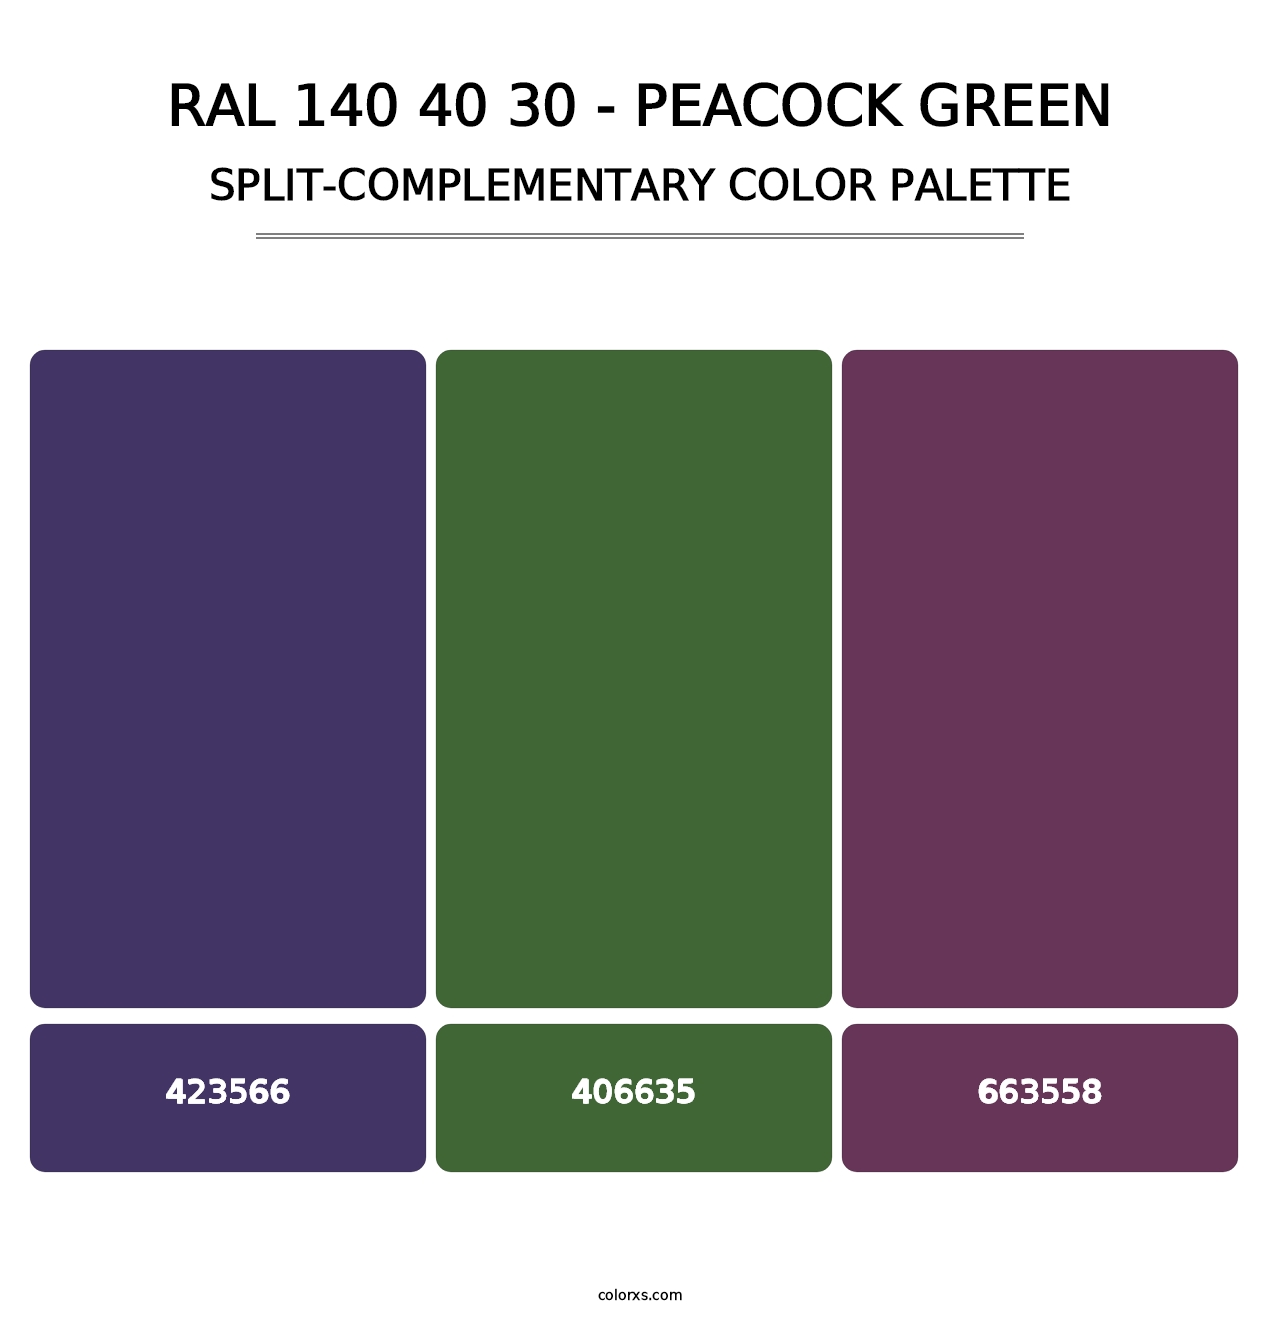 RAL 140 40 30 - Peacock Green - Split-Complementary Color Palette